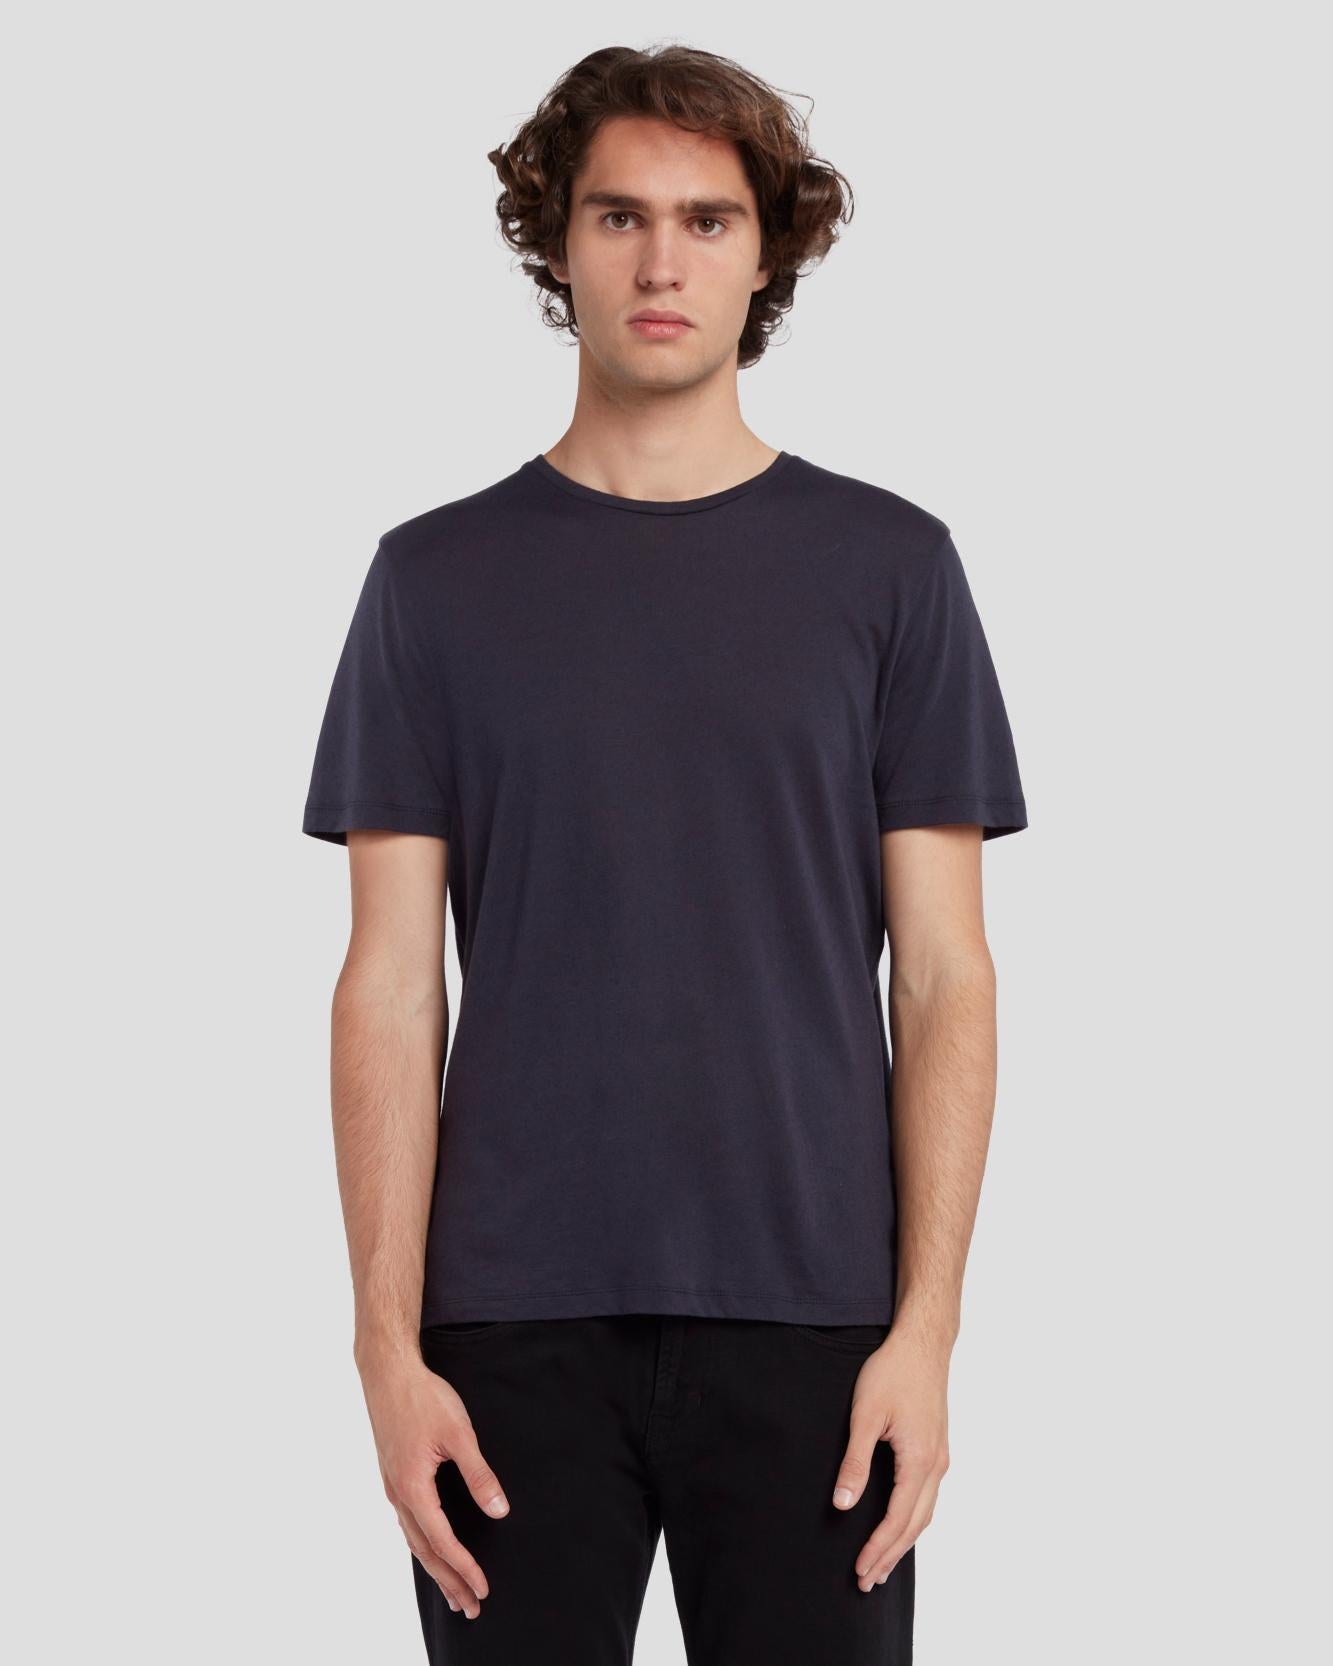 Cashmere Blend Tee in Navy | 7 For All Mankind